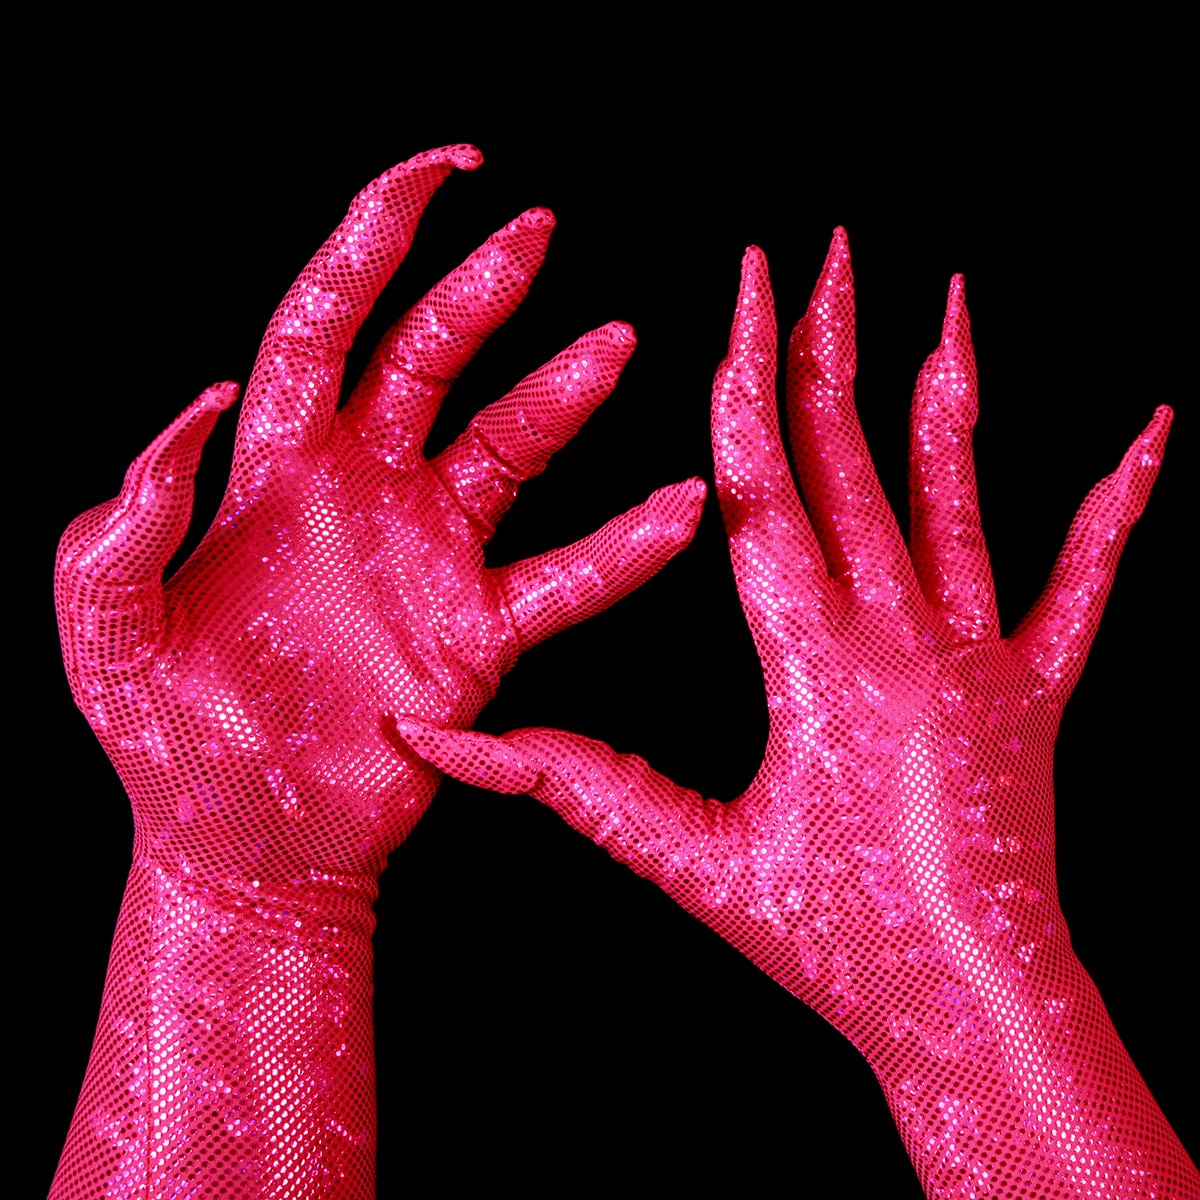 Two hands are shown wearing sparkly hot pink gloves, with built in claws.